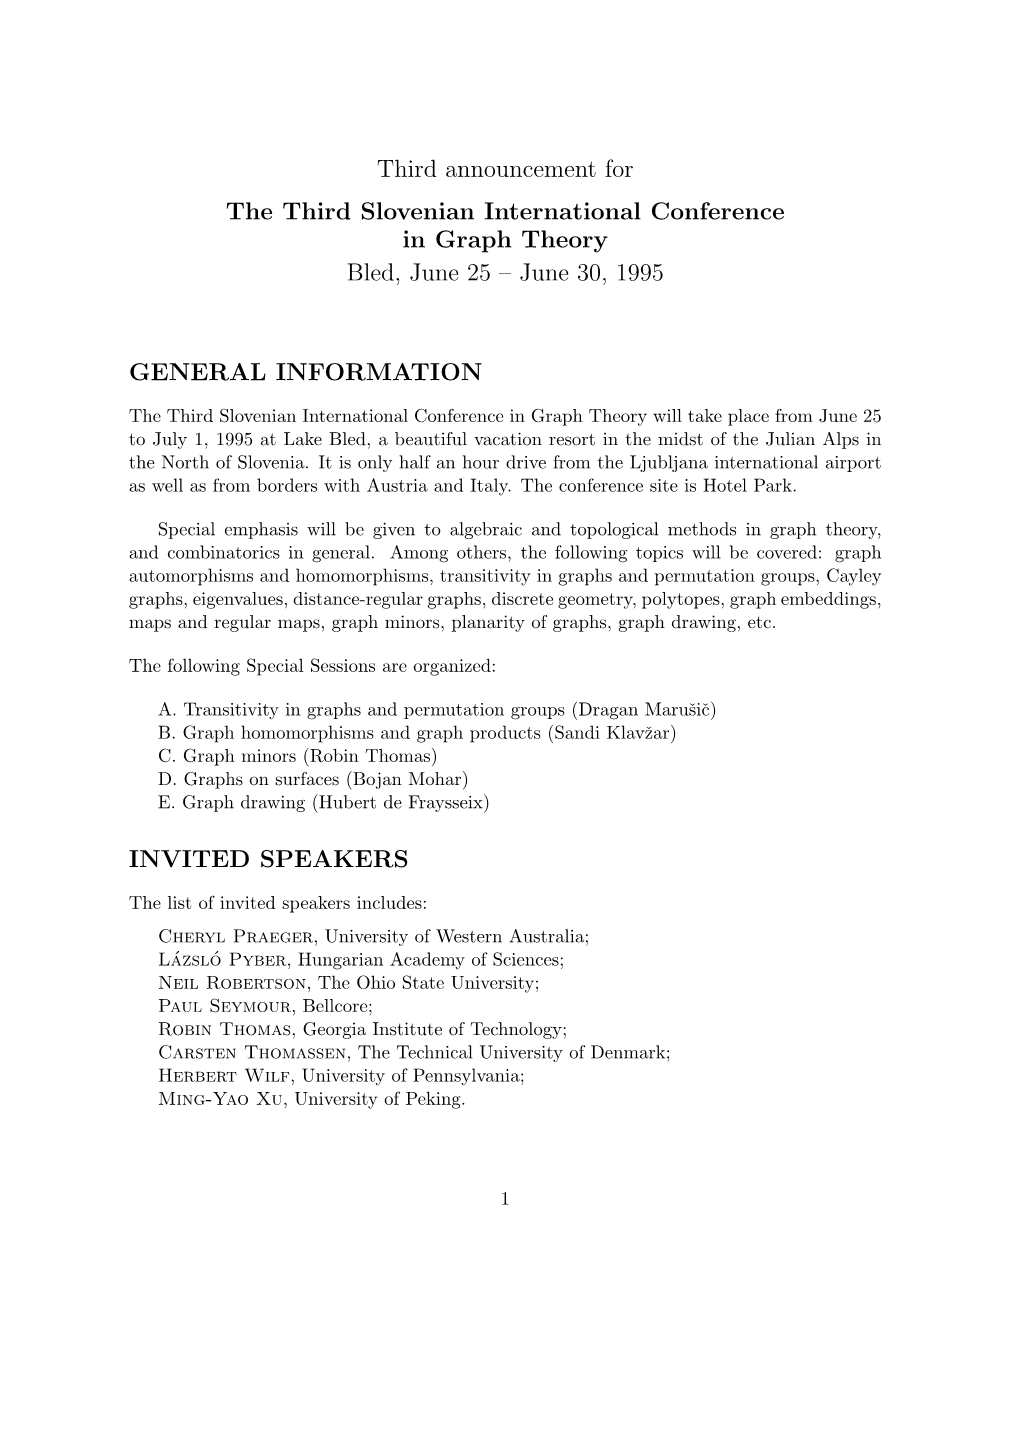 Third Announcement for the Third Slovenian International Conference in Graph Theory Bled, June 25 – June 30, 1995